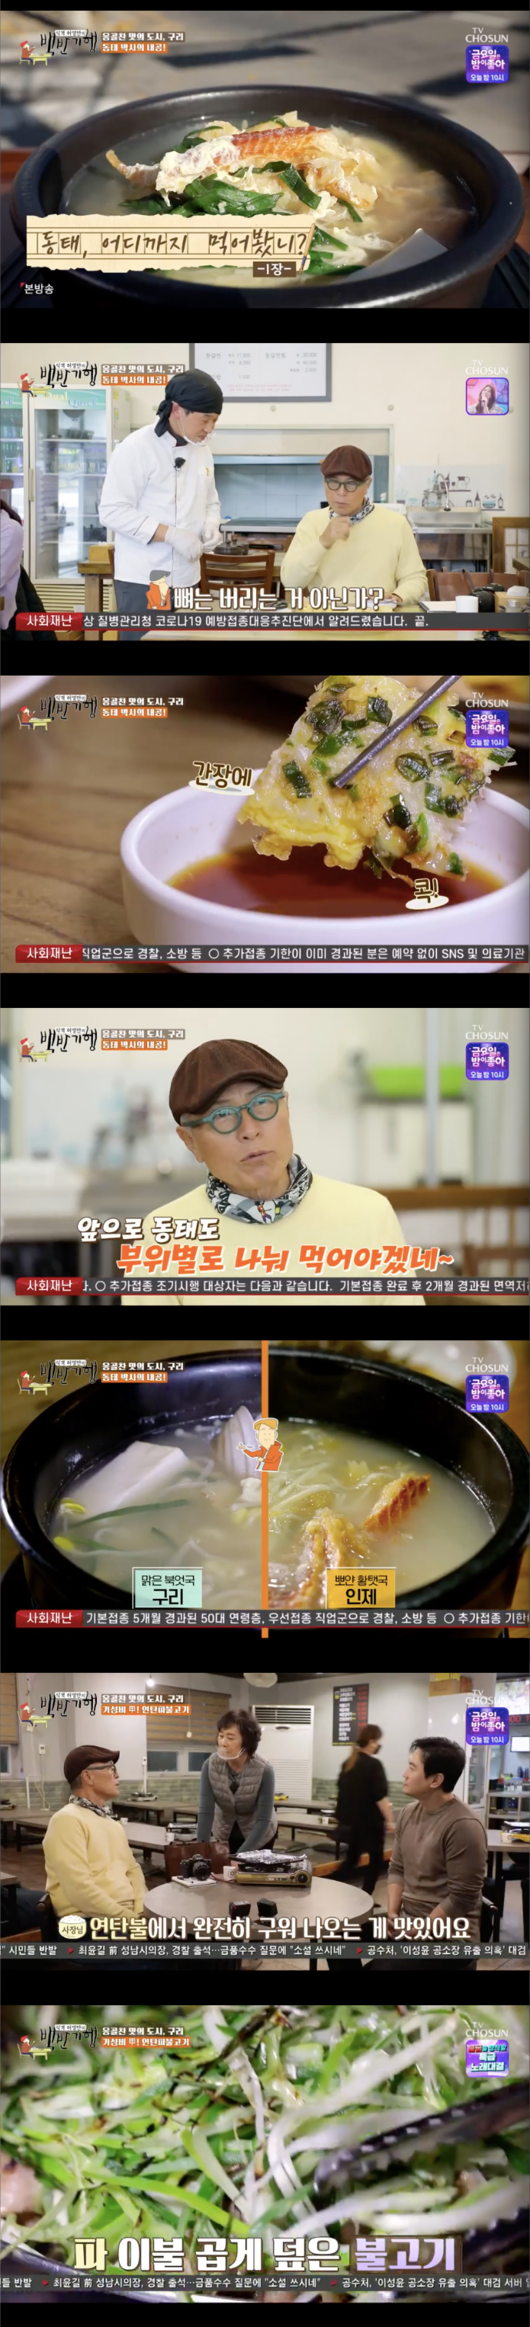 Park Yong-woo, who is a white-haired man, said he was the single and laughed when he said he was the most beloved.Park Yong-woo appeared as a guest in the TV Chosun Huh Young Mans Food Travel broadcast on the 26th, and found a copper restaurant in Gyeonggi Province.Huh Young-man, who visited Dongtae Restaurant on the day, made a Donggeuljeon. It is a Donggeul Galbi like a mackerel depletion.Huh Young-man explained, It is not to throw away the bones that come out when you open the Dongtaepo, but to send it to the flesh and give it a transfer.The more you go to the tail, the harder and more meaty the more you go to the belly, the boss said.Huh Young-man laughed, saying, Now we should share the dynamics by region.Huh Young-man tasted Donggaljeon and expressed satisfaction, saying, There are more flesh on the bones than I thought. It is also delicious. I do not know how soft or chewing eggs or chewing flesh.It is sweet, and it tastes like white paper. Huh Young-man was curious to see the clear and transparent soup. The liver is very light, he said. It tastes very good, he said.The boss used two kinds of dry tangled bones and wet tangled bones, each boiled separately and mixed with two to revive the richness and cool taste.Huh Young-man said, It is a table that upgraded the quality of the dynamics.Park Yong-woo and Huh Young-man found a briquette bulgogi house. In half visuals of par-half meat, Huh Young-man laughed, I thought I was carrying a wave.Park Yong-woo nodded, saying, The smell is already so good, and It is a unique taste of briquette bulgogi.It tastes sweet when you bake a green onion, and I think youre after it, said Huh Young-man.Park Yong-woo is a 26-year-old Actor in 1995 debut this year. Huh Young-man said, I think I would have changed my bankbook several times.Im not worried about eating if I quit Acting right now.Park Yong-woo laughed and said, I am doing my own financial technology.Ive been doing things like fund ETFs, but Ive been interested in the world since Ive been seeing newspapers I havent seen. Huh Young-man asked, Have you seen any damage?Park Yong-woo replied, I saw some Revenue. Huh Young-man was nervous about I ask you to share information in the future.Huh Young-man also asked about Park Yong-woos ideal type, who replied, I have to be excited once, and I want him to be excited.Huh Young-man asked about the person he loved most in life. Park Yong-woo said, I love me the most. I think I can love others if I love me.I love my parents a lot. Huh Young-man cheered on his love by doing high fives.TV Chosun Huh Young-mans White Travel broadcast screen capture